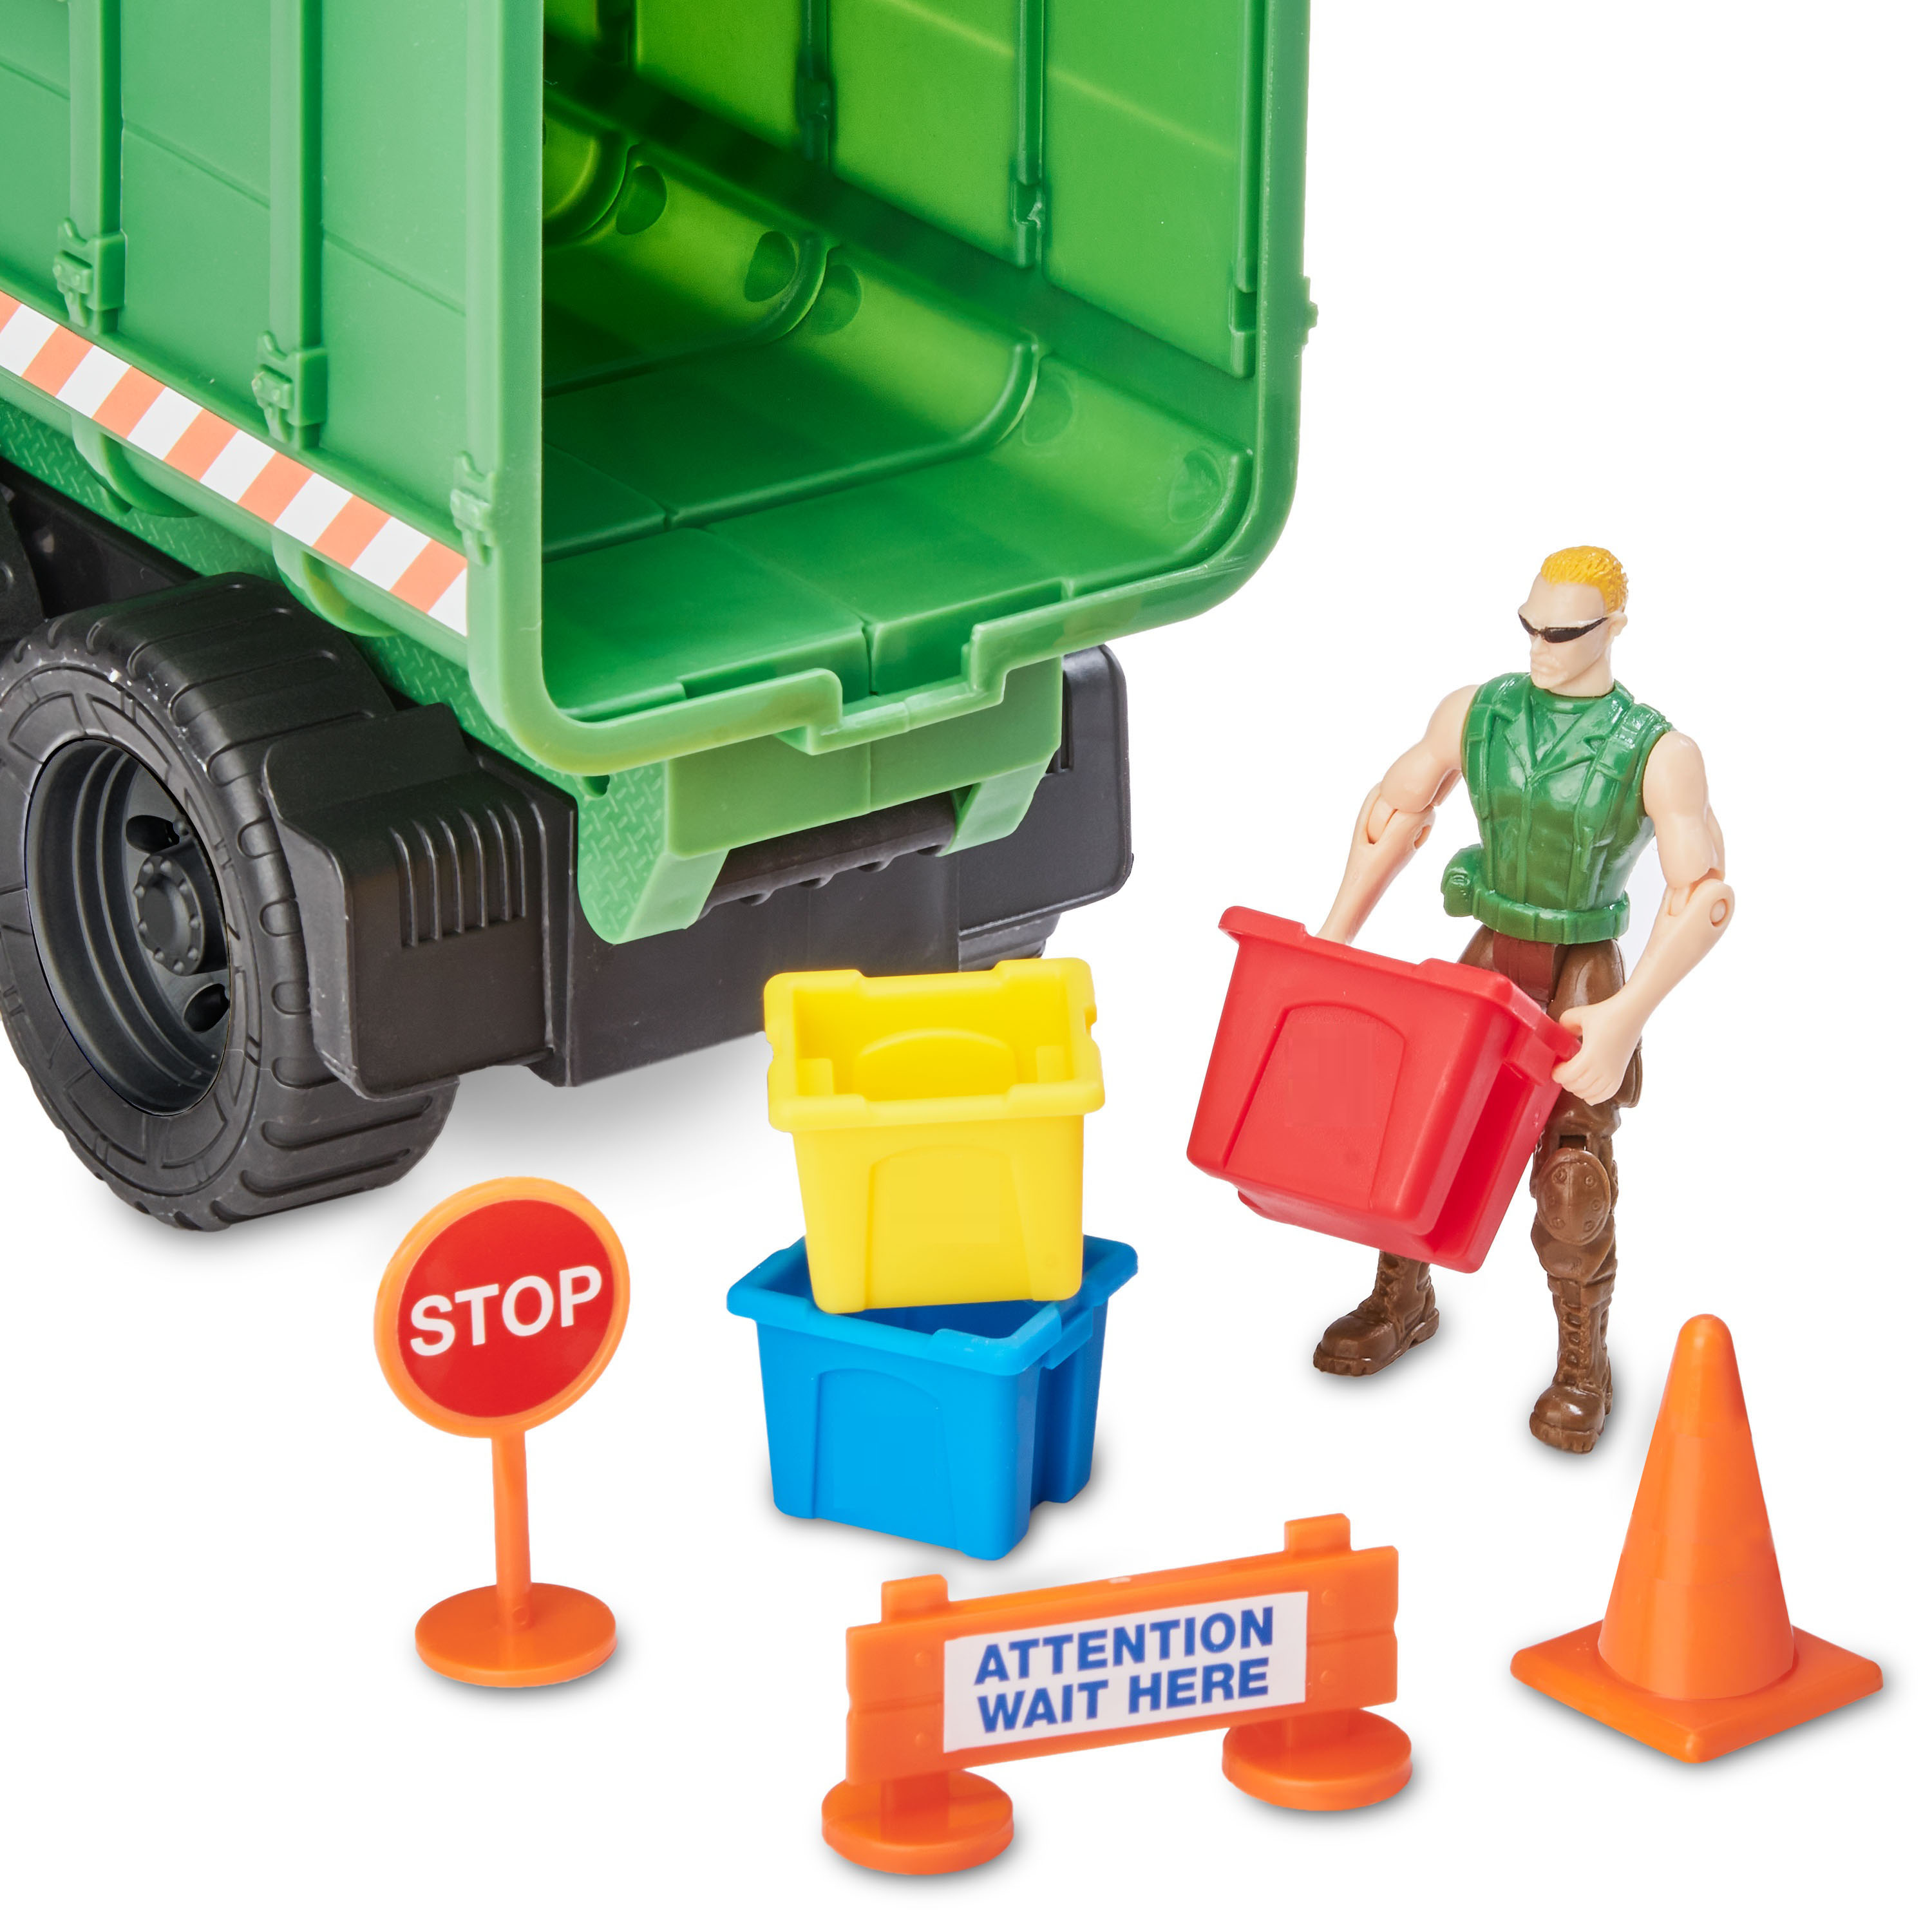 Kid Connection Recycling Truck Play Set, 11 Pieces - image 4 of 6